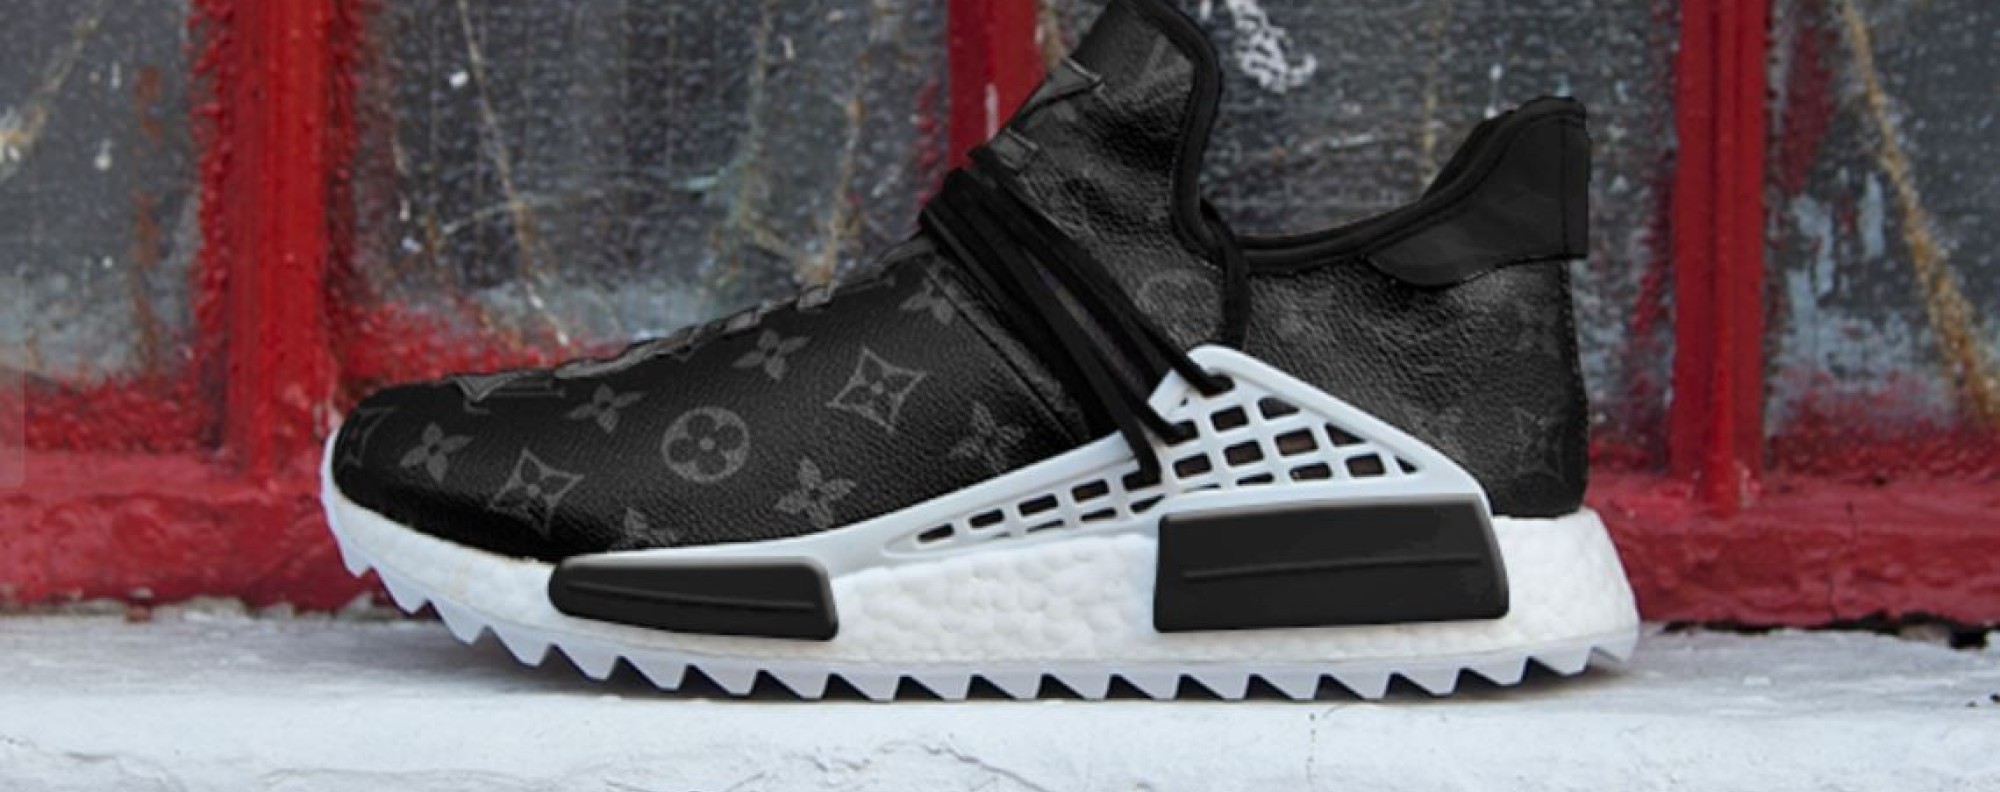 Louis Vuitton x adidas 'Eclipse' NMD Hu puts other sneakers in the shade |  South China Morning Post